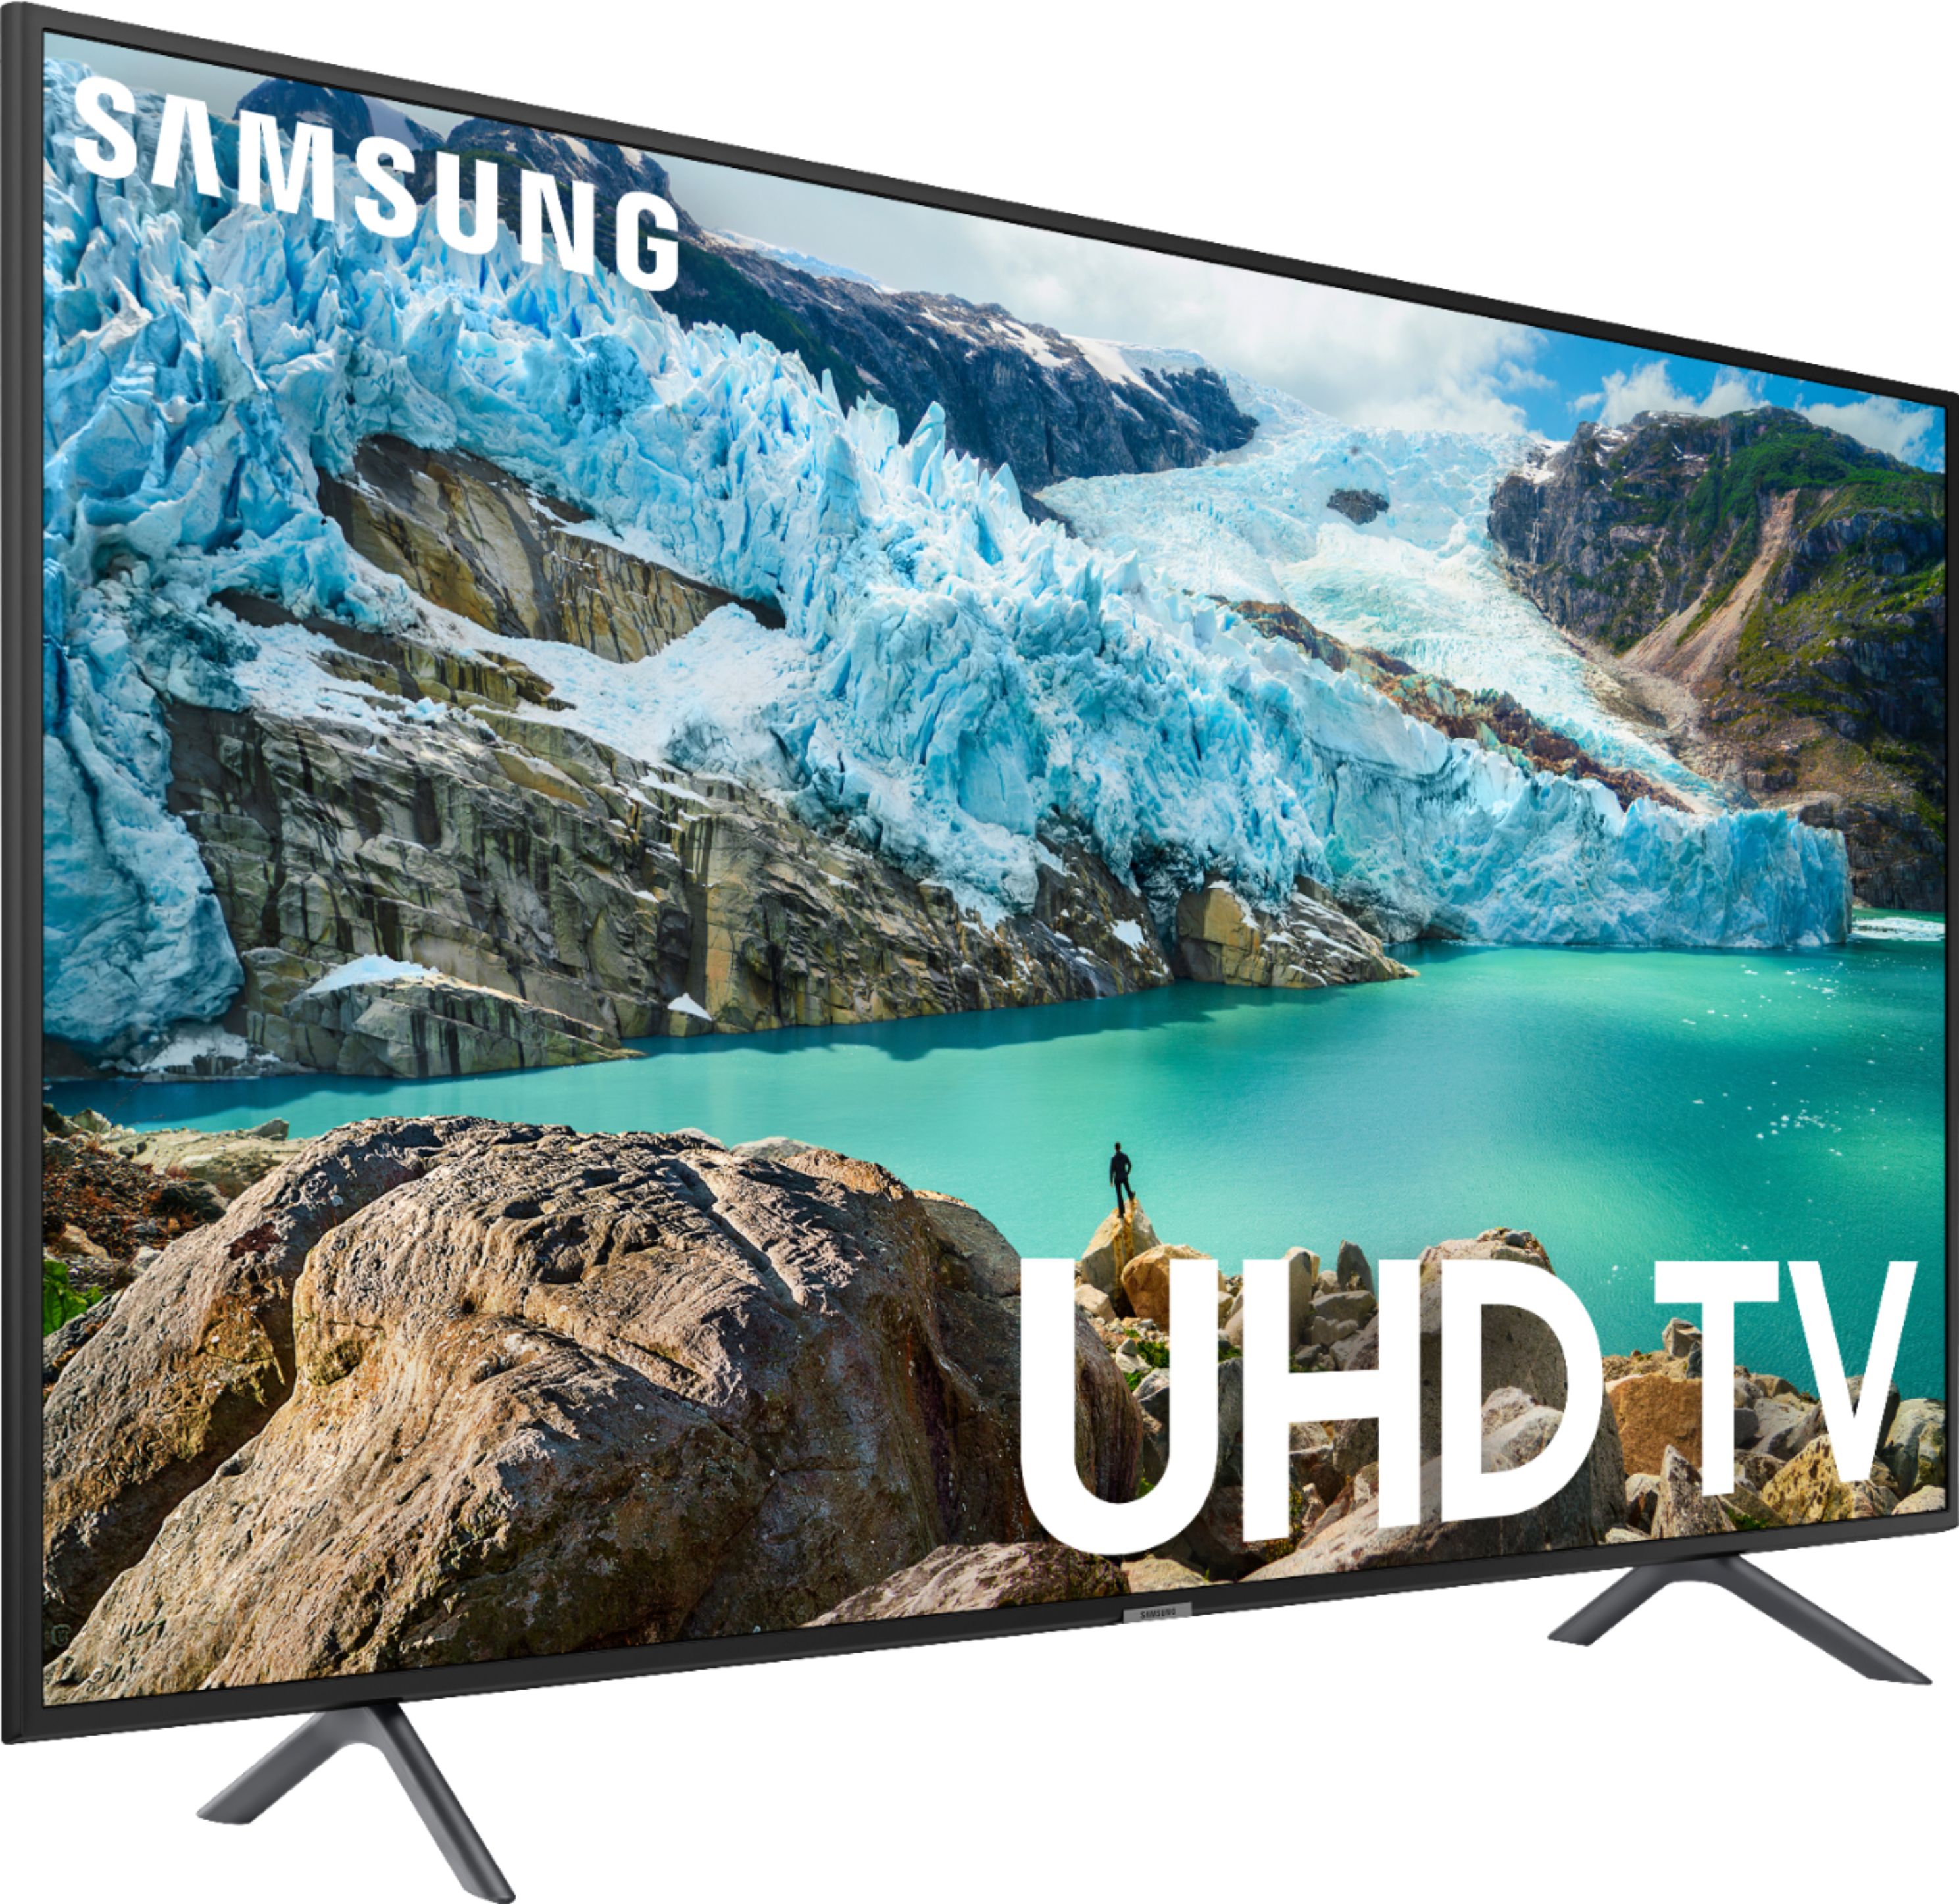 Questions and Answers Samsung 55" Class 7100 Series LED 4K Smart Tizen